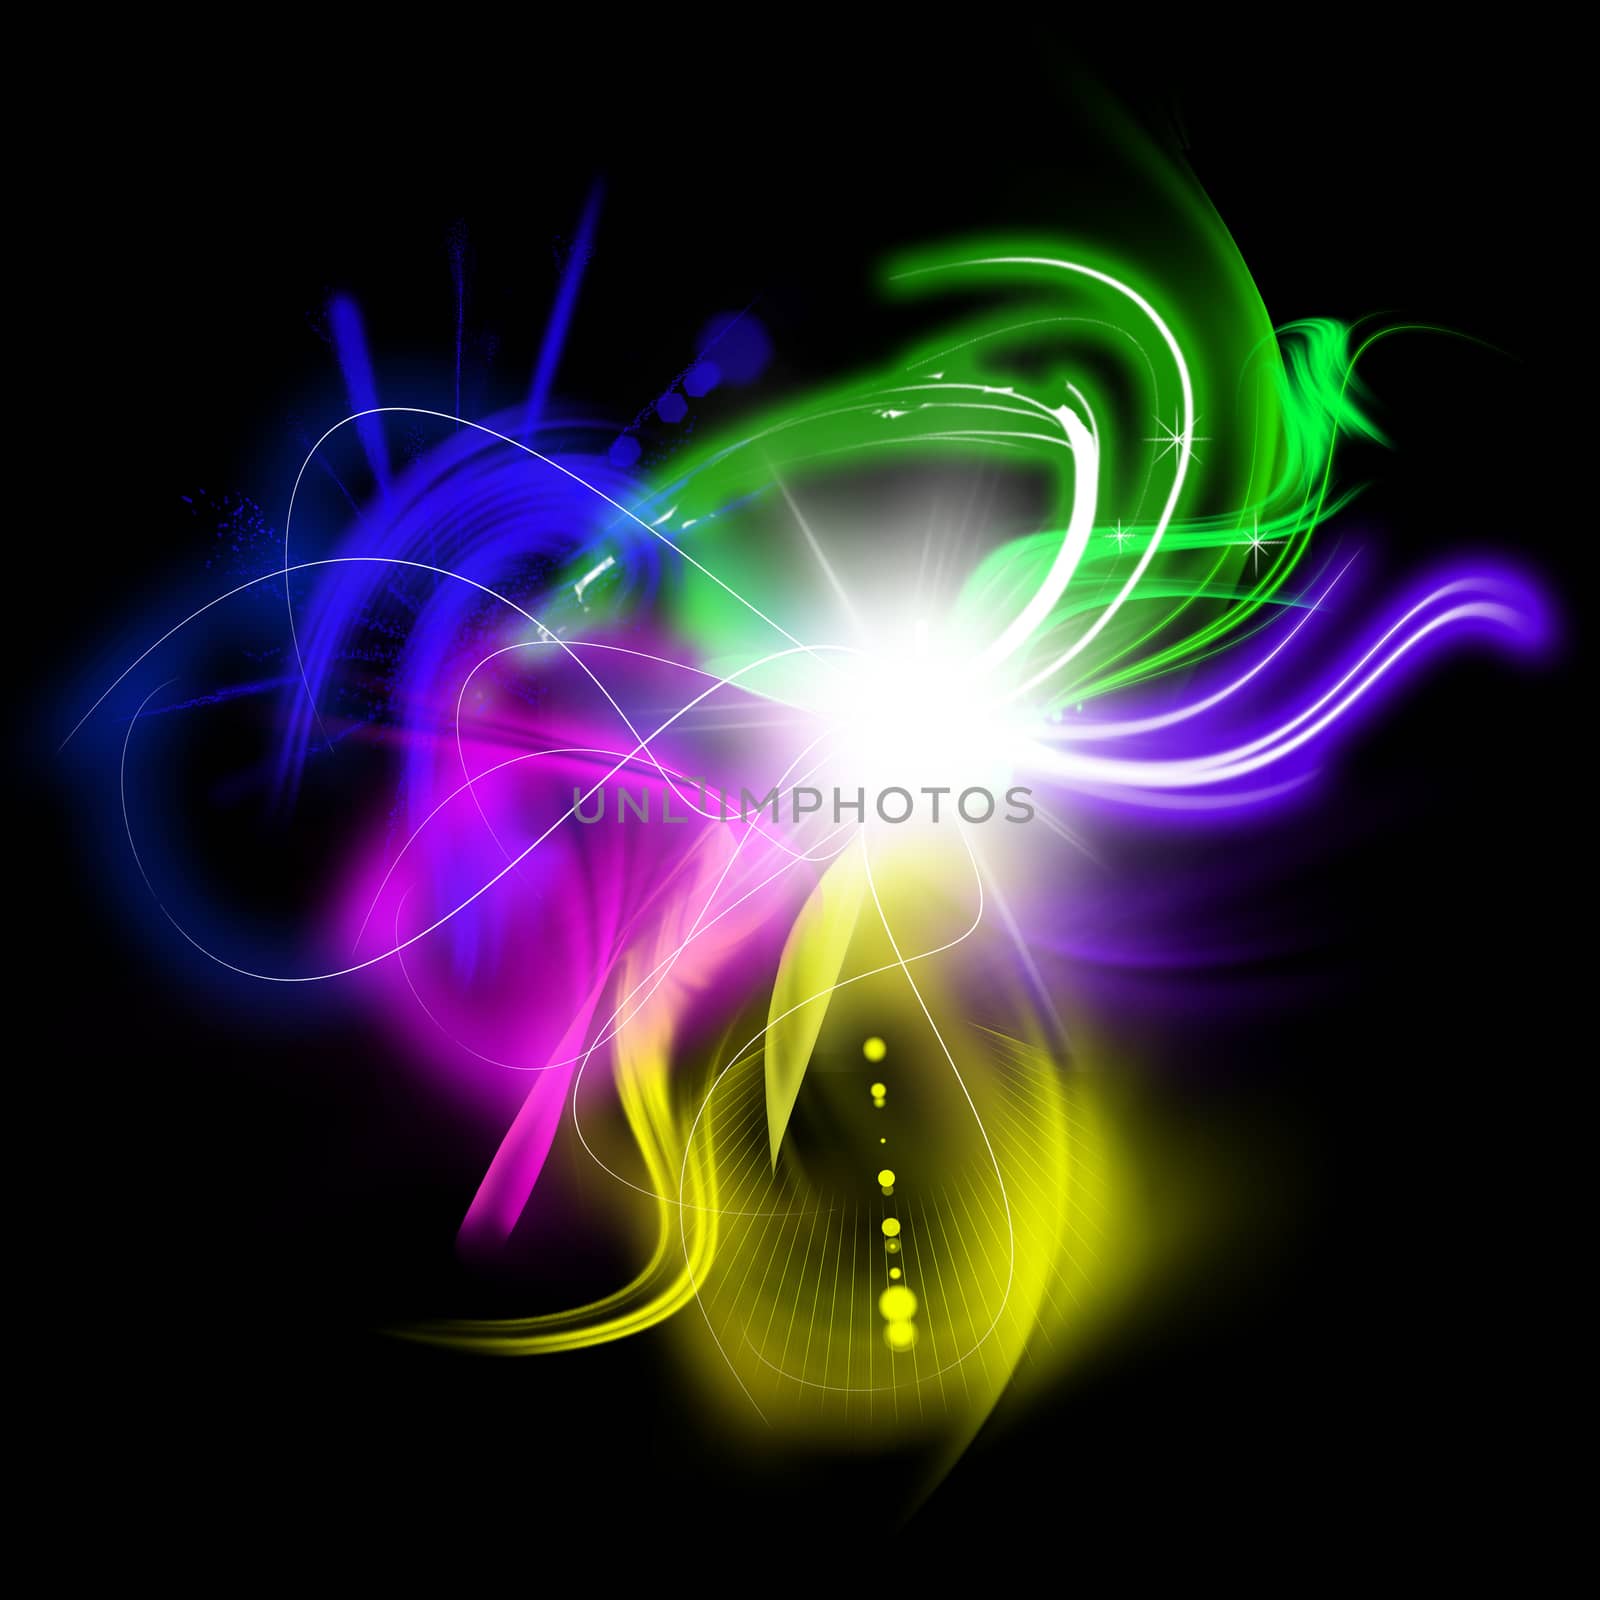 High-Resolution Elements Isolated on Black Background Easy to Apply to Your Design
